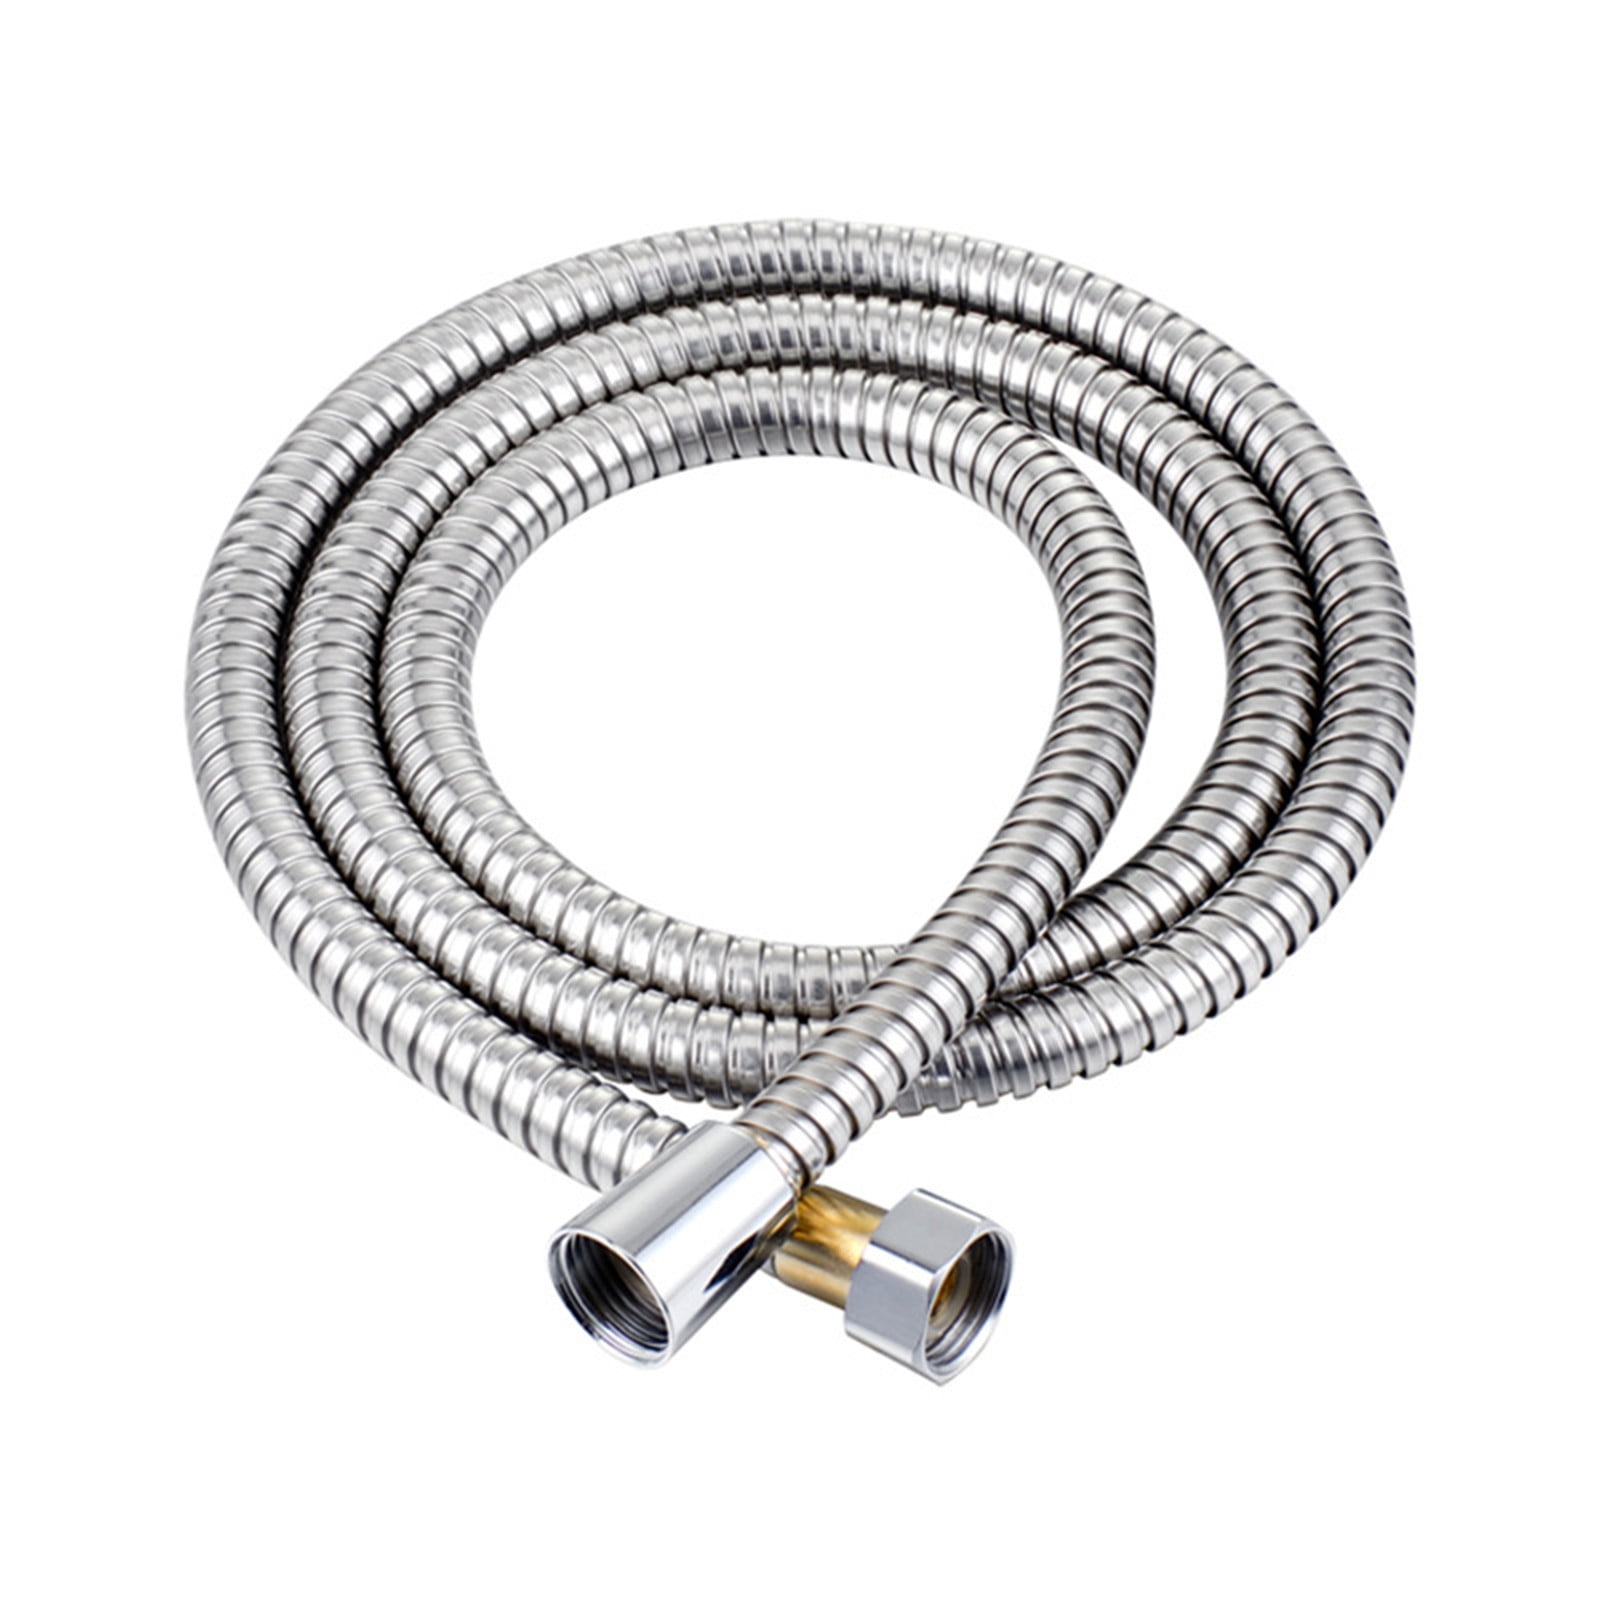 Shower Hose Stainless Steel 79 Inchs Extra Long Chrome Handheld Shower Head Hose Replacement with Brass Nuts 